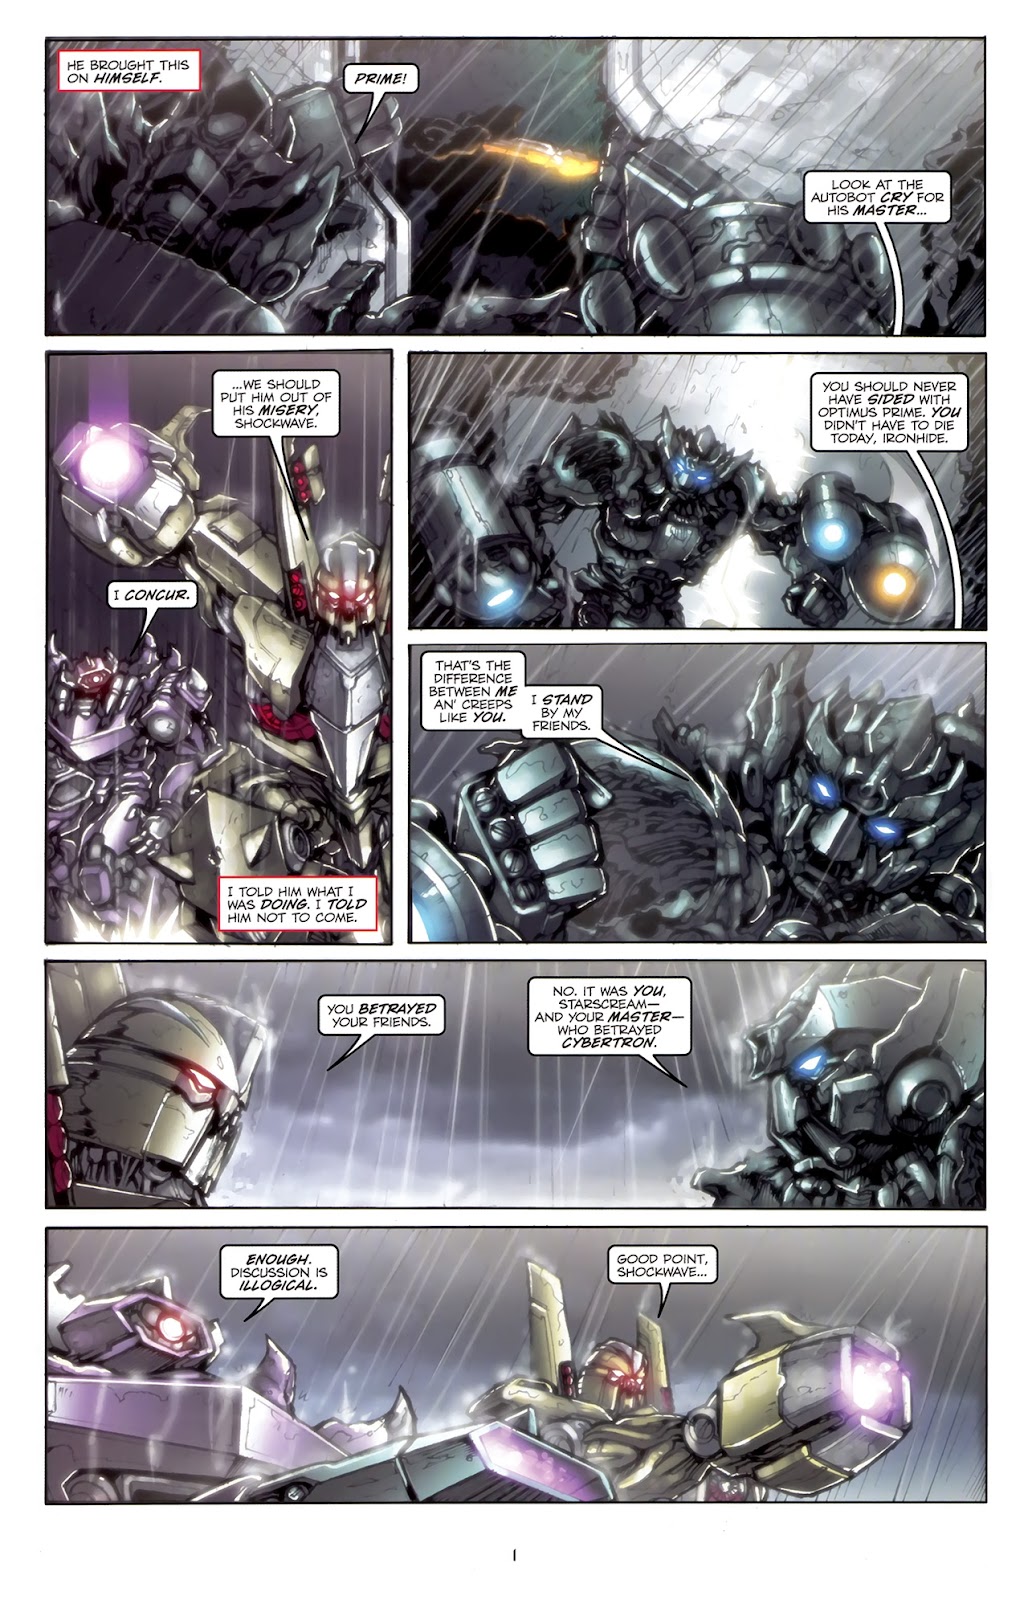 Transformers: Dark of the Moon: Movie Prequel: Foundation issue 4 - Page 3